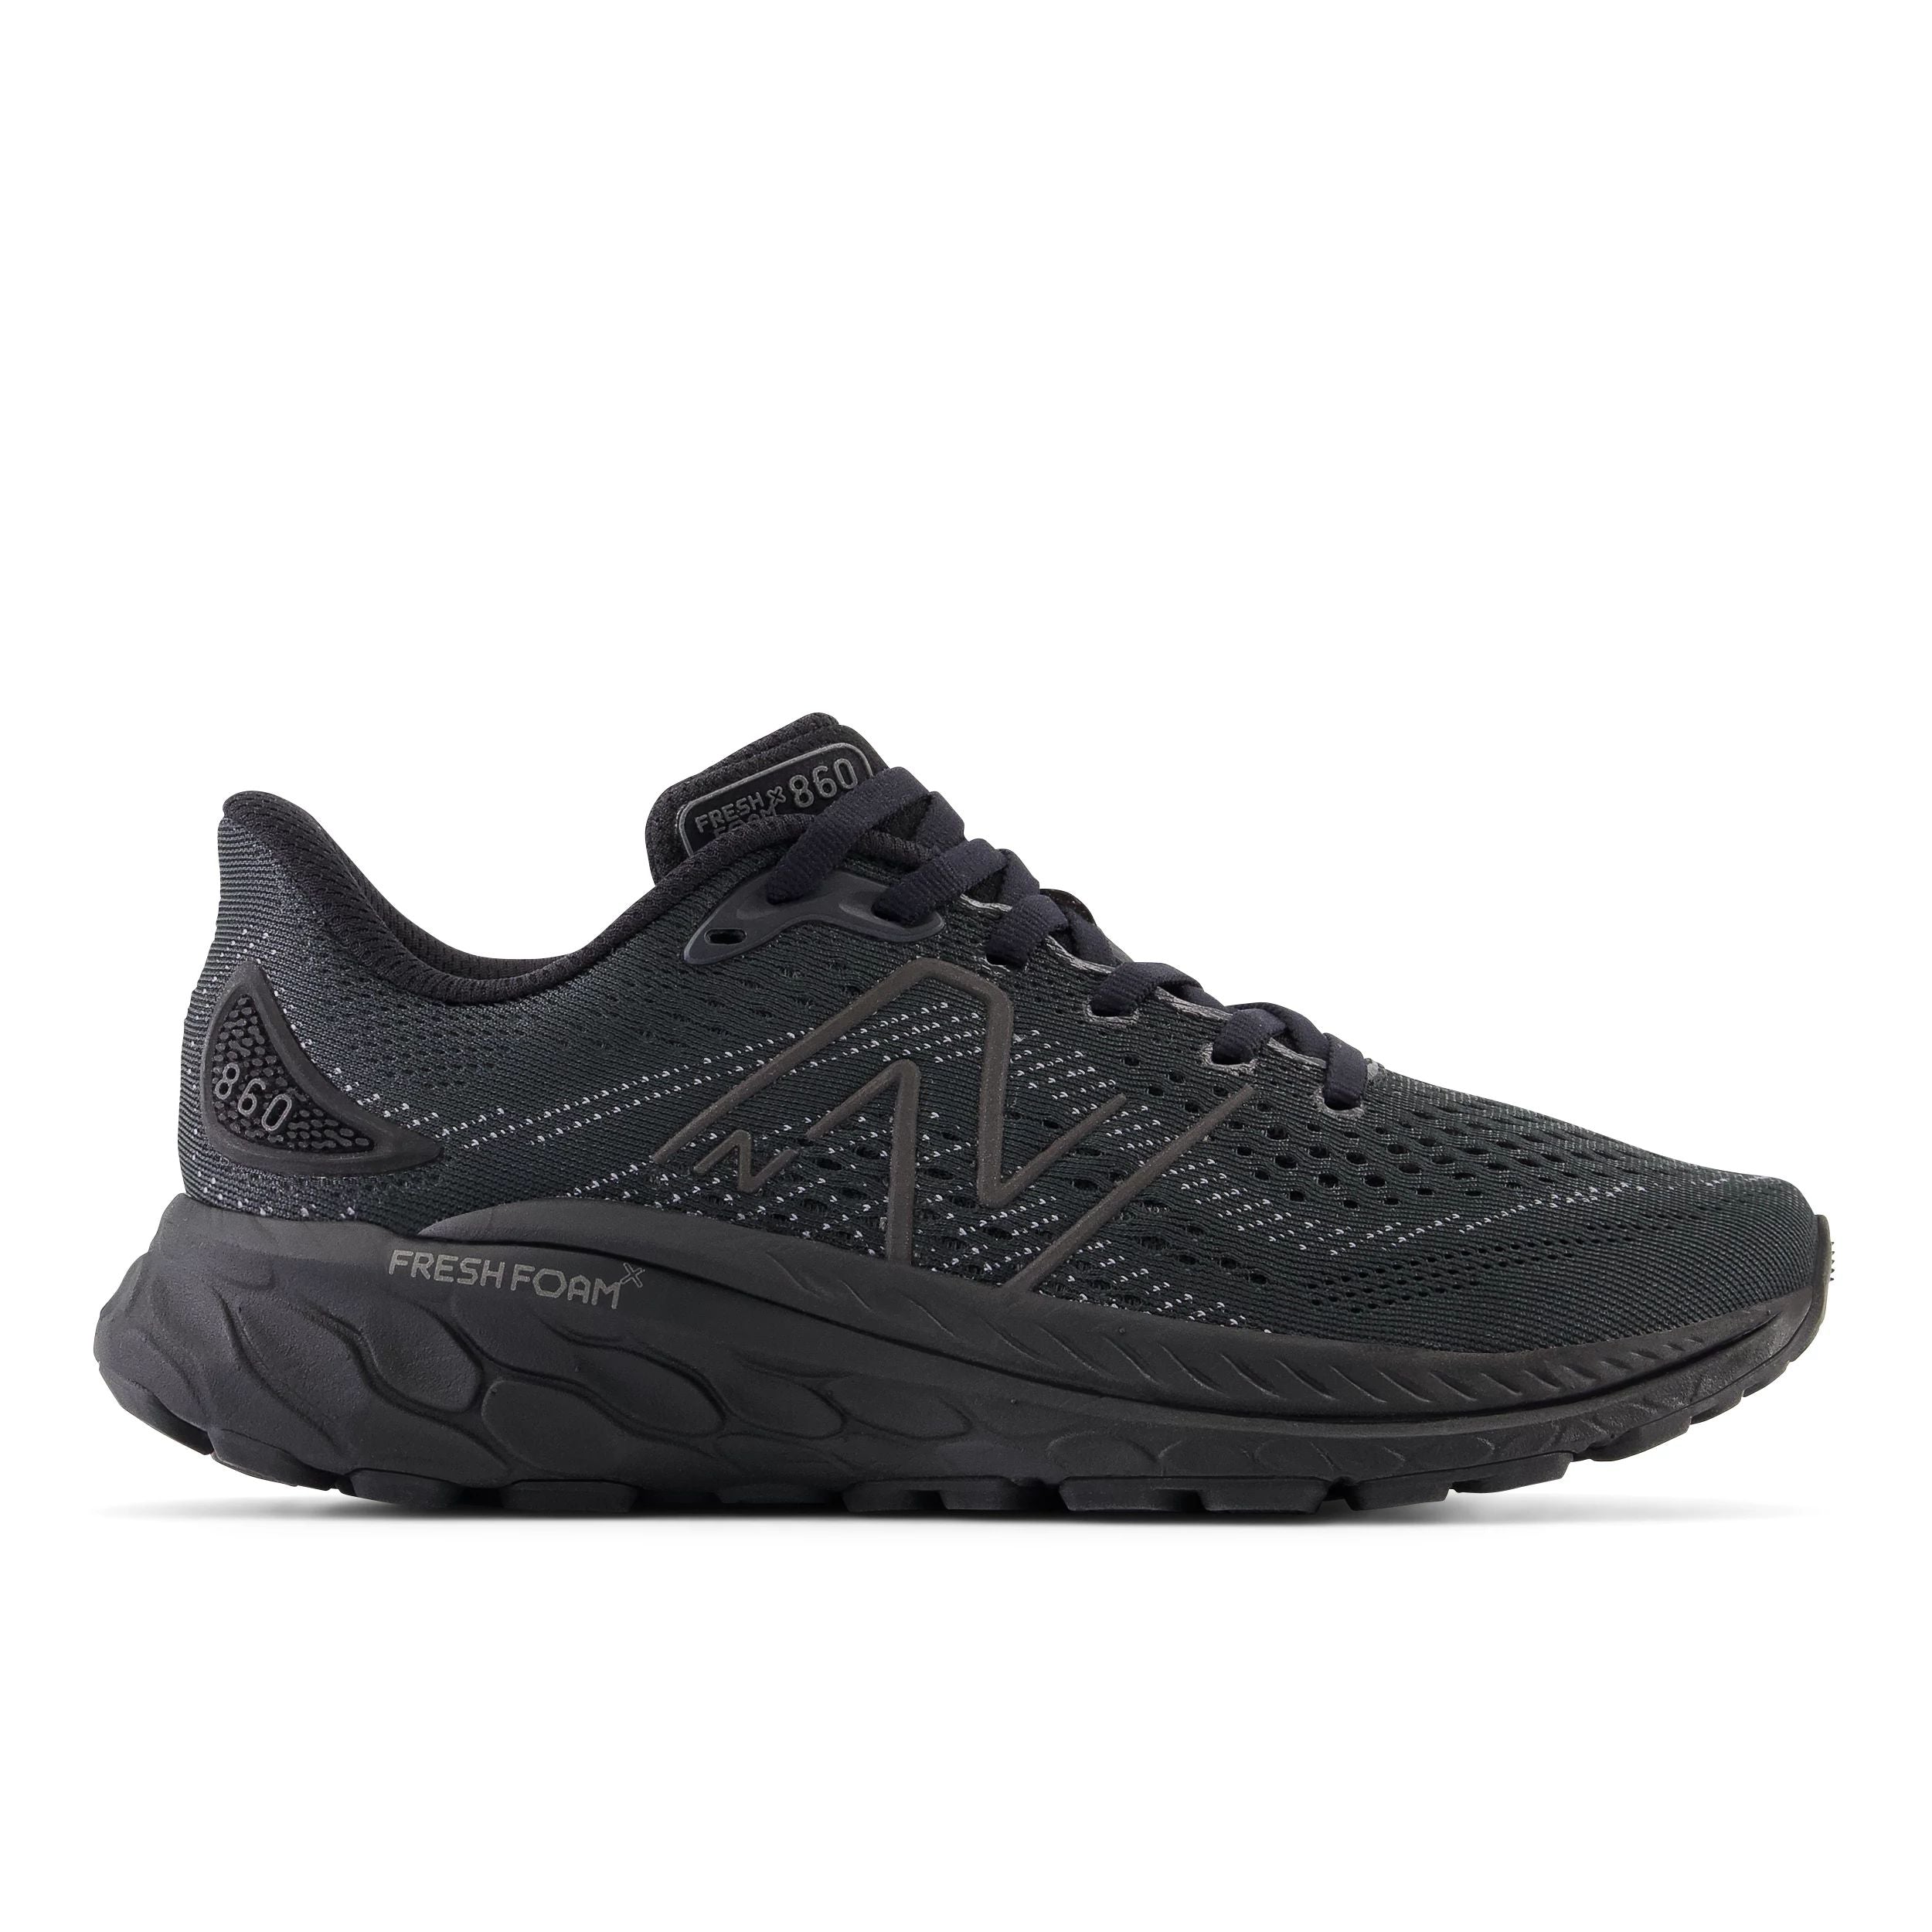 Lateral view of the Women's New Balance 860 V13 in the color Black/Black